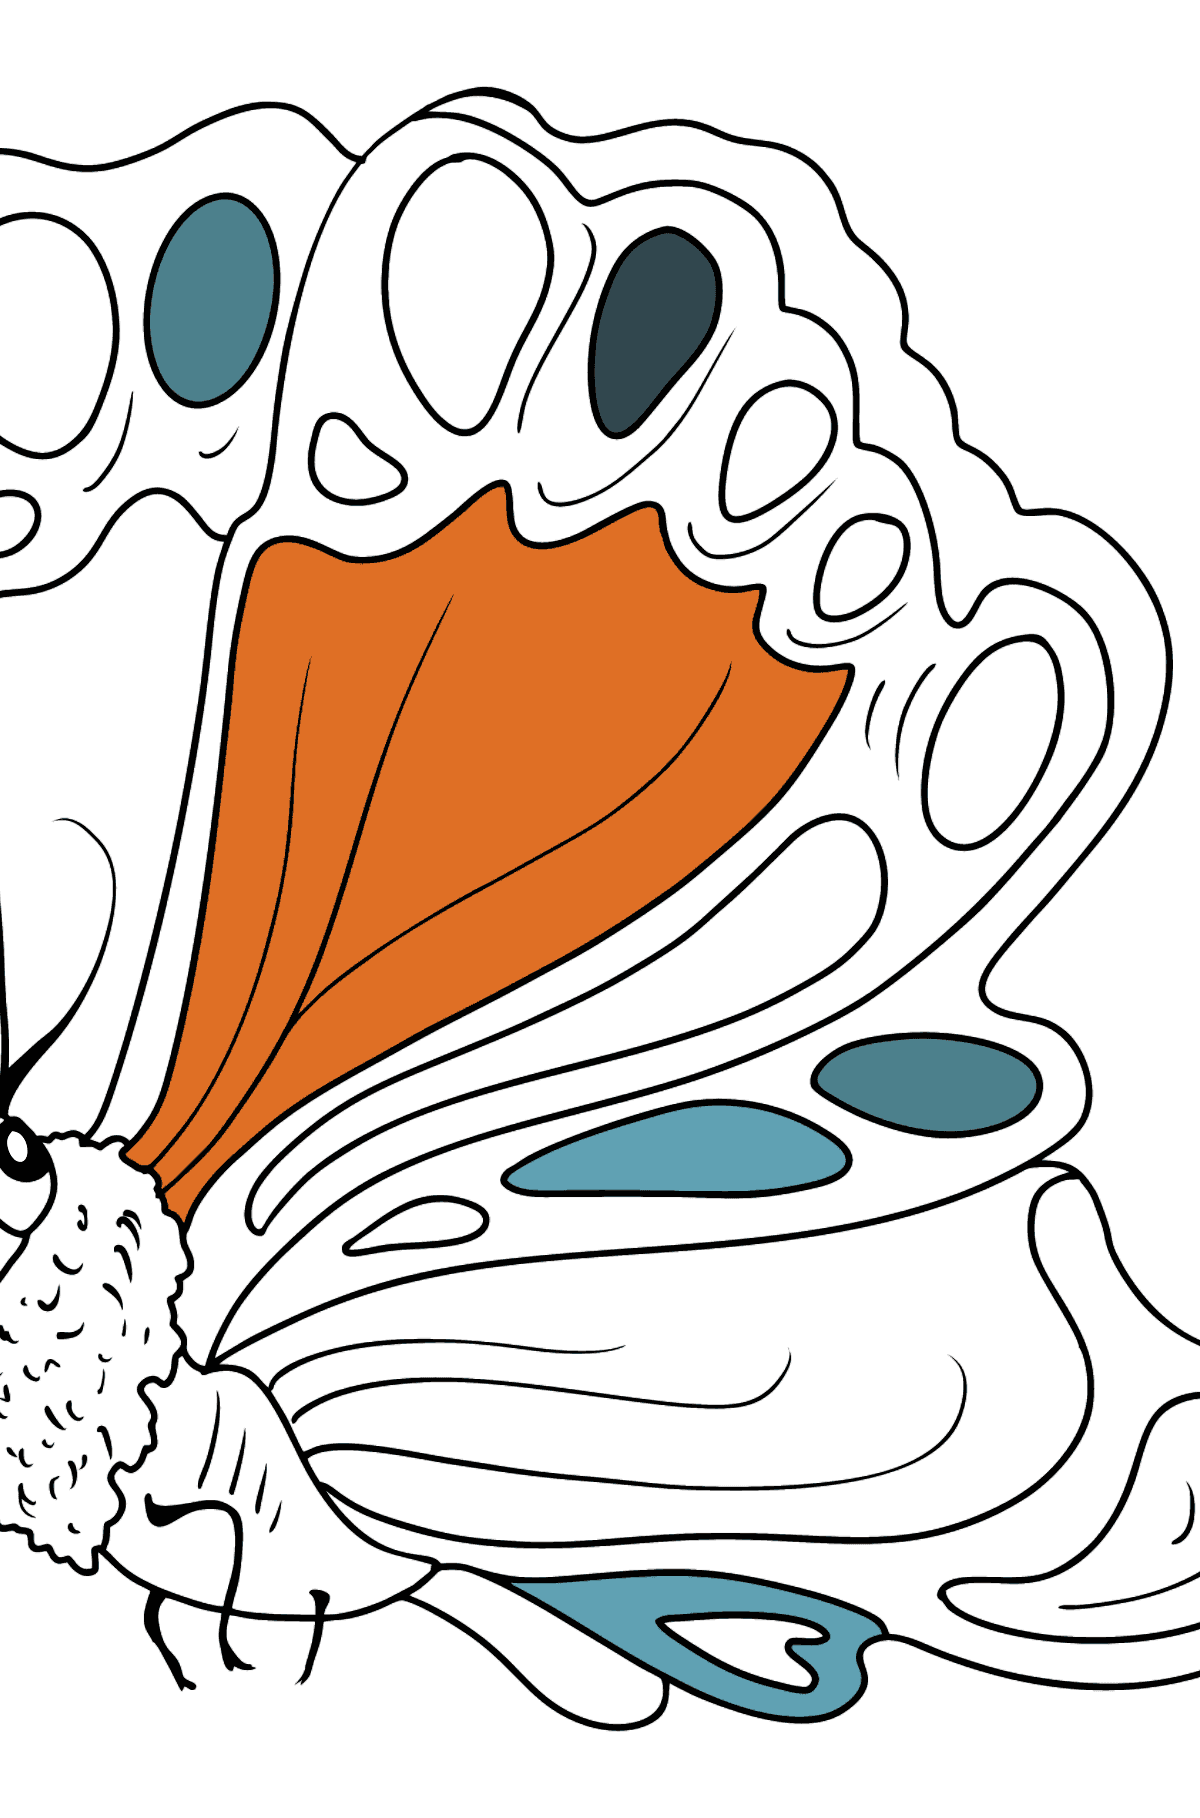 Butterfly Sideways coloring page - Coloring Pages for Kids